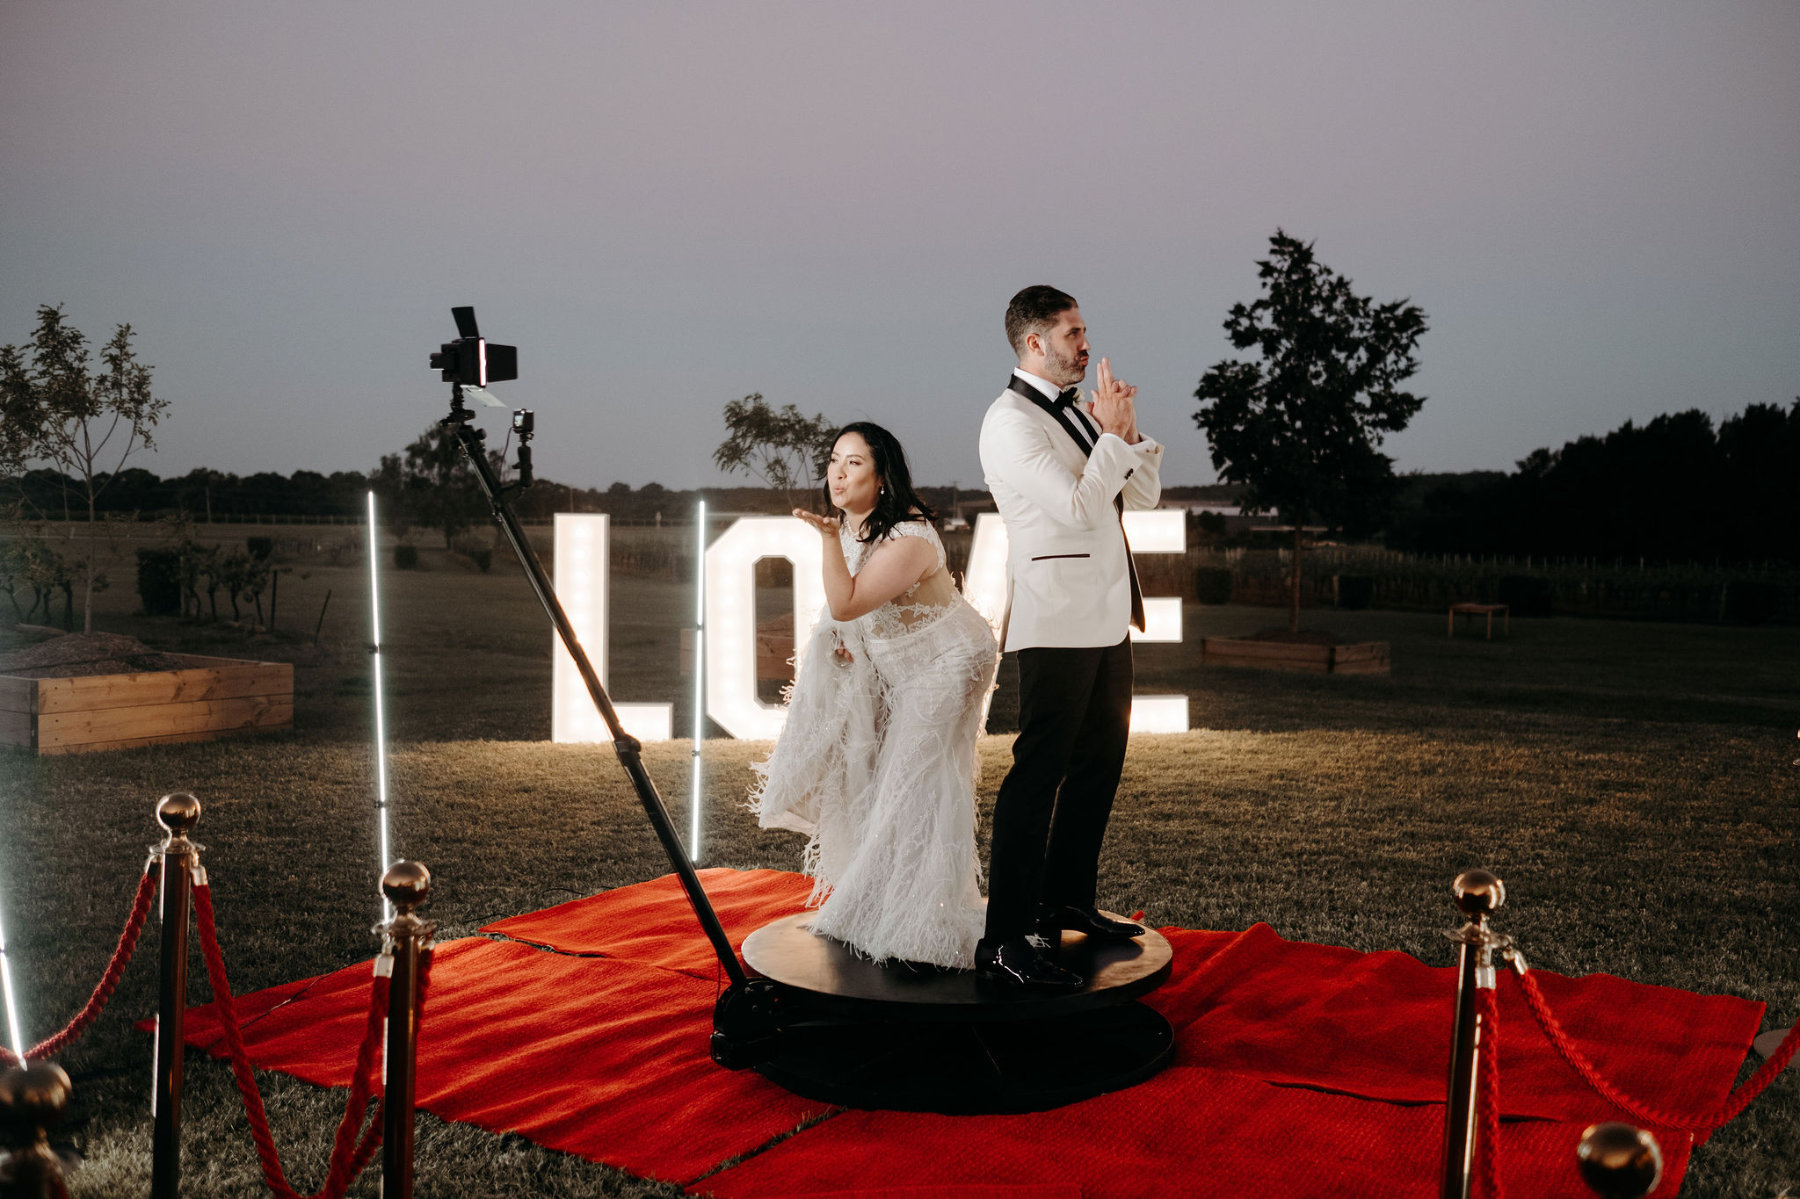 Luxury marquee wedding for Vanessa and Joe at Peterson House Hunter Valley. Planned and styled by Hunter Events NSW. Photographed by Popcorn Photography